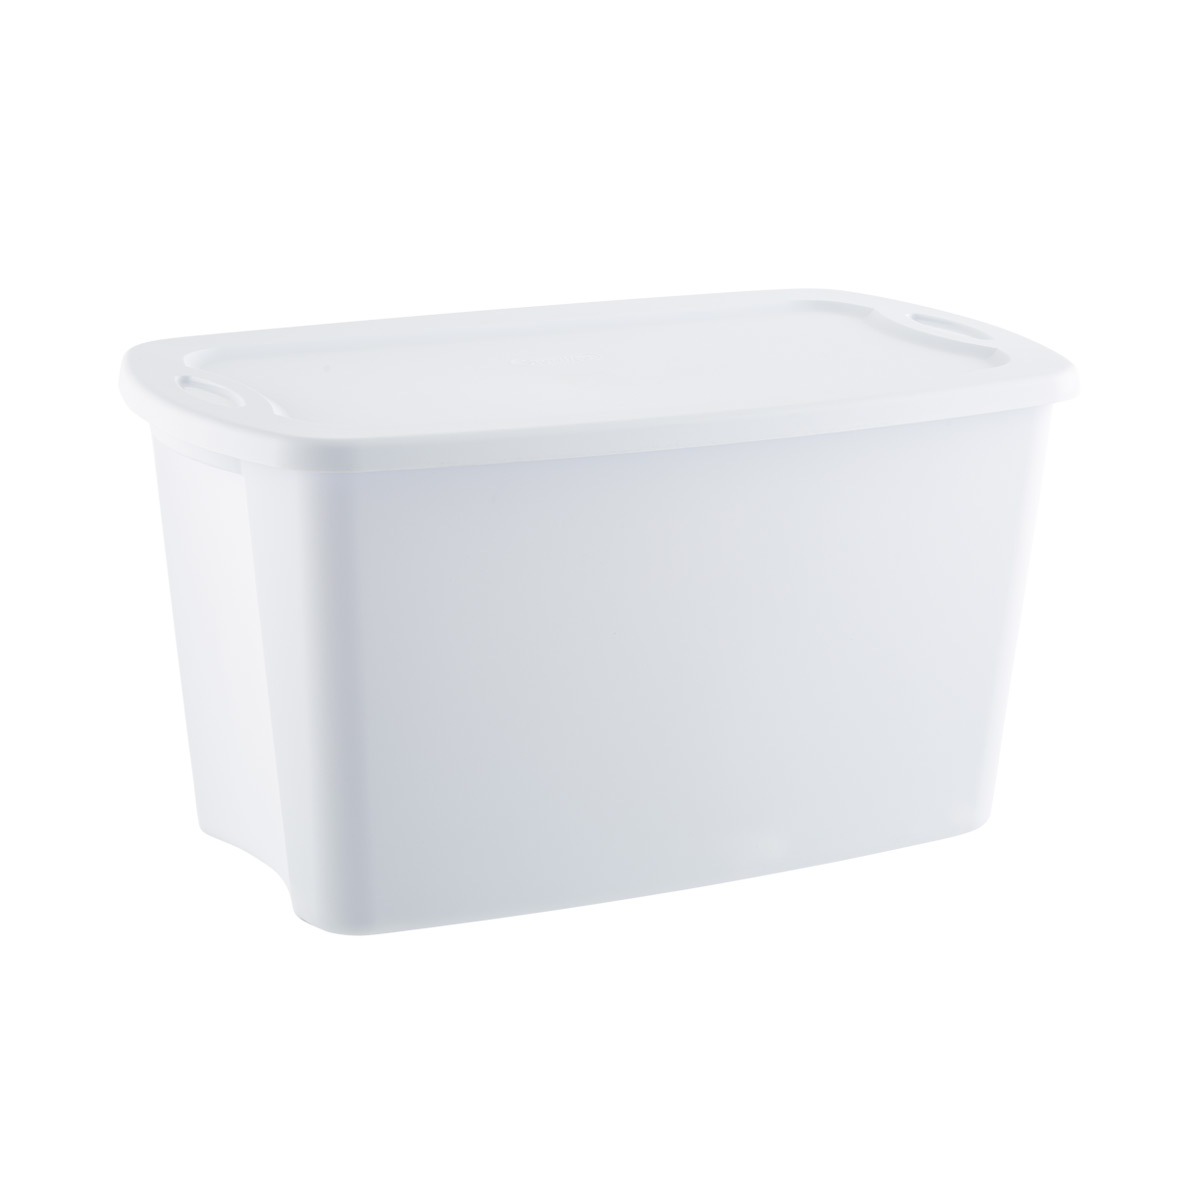 https://www.containerstore.com/catalogimages/337818/10074121-Stacker-Tote_30gal-White.jpg